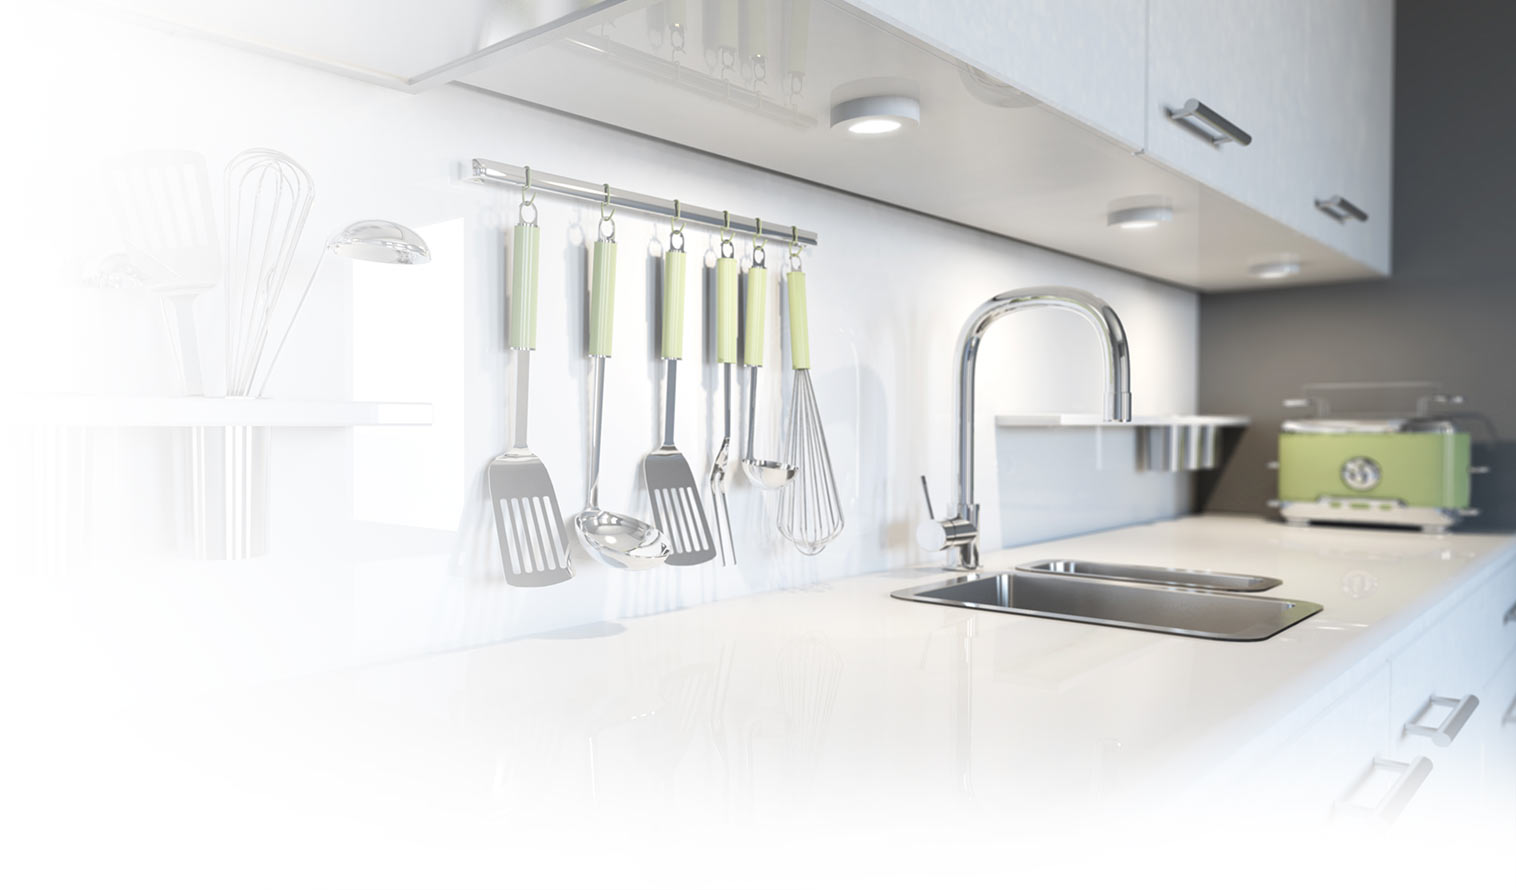 Water systems and faucets for kitchen